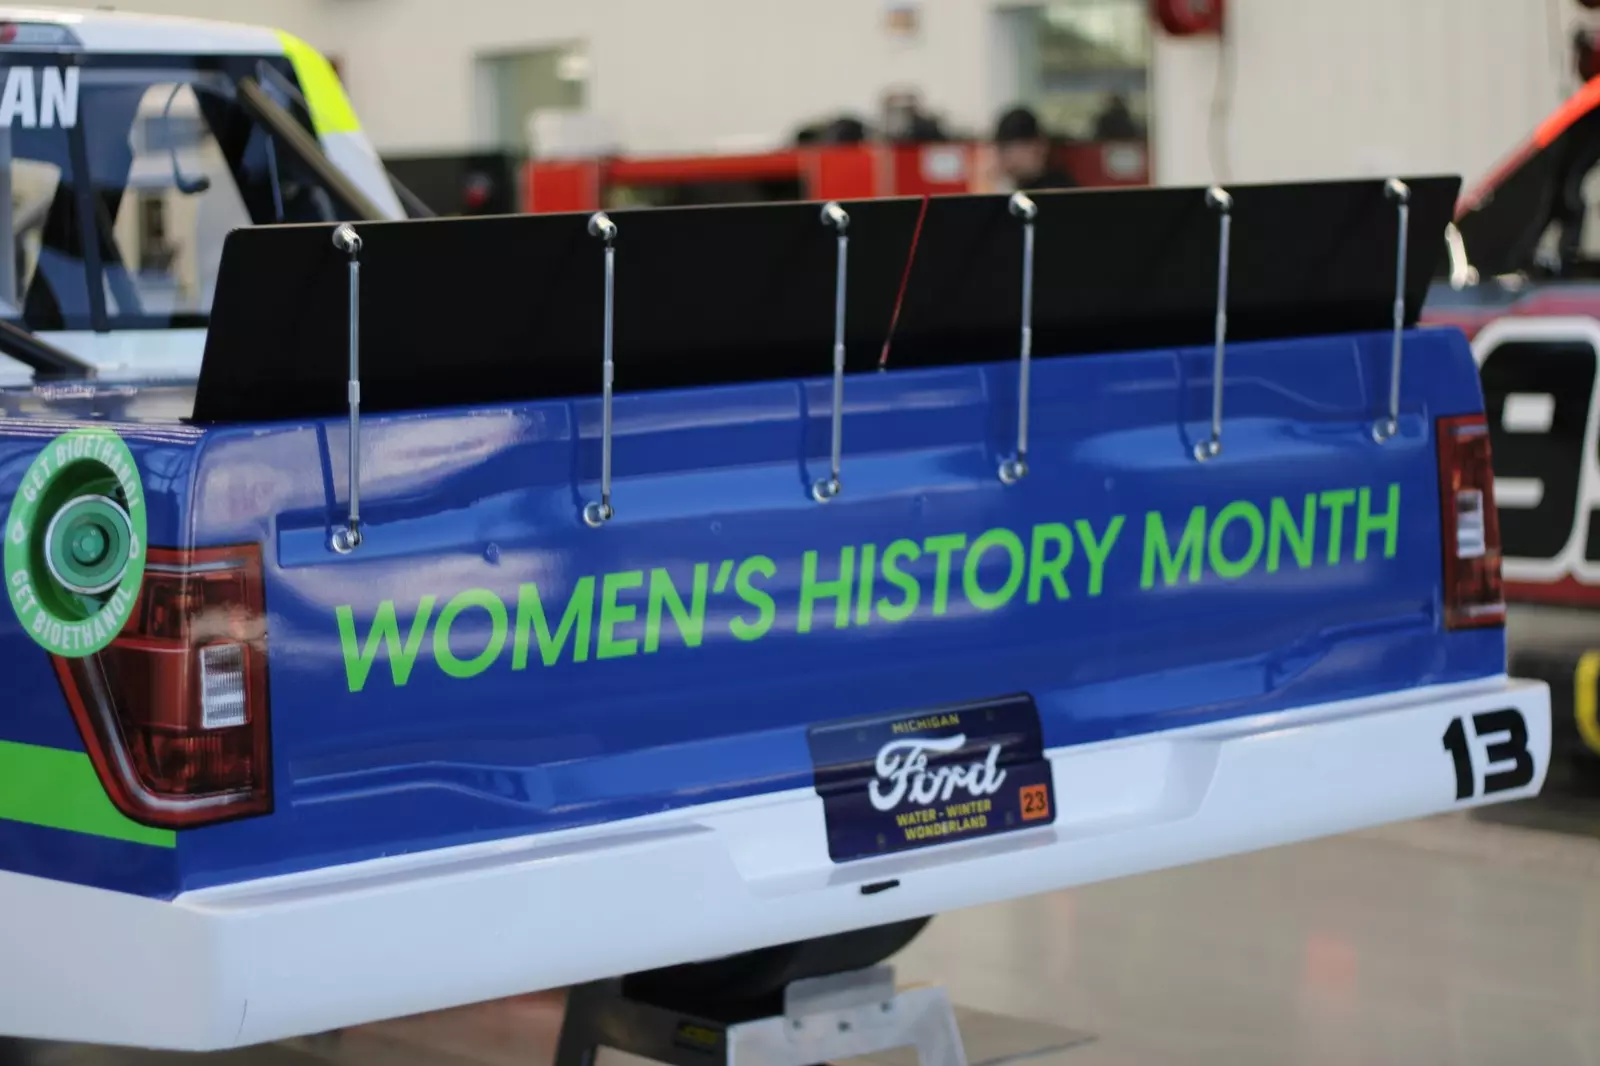 AdventHealth partners with driver Hailie Deegan to celebrate the women of NASCAR during Women’s History Month 